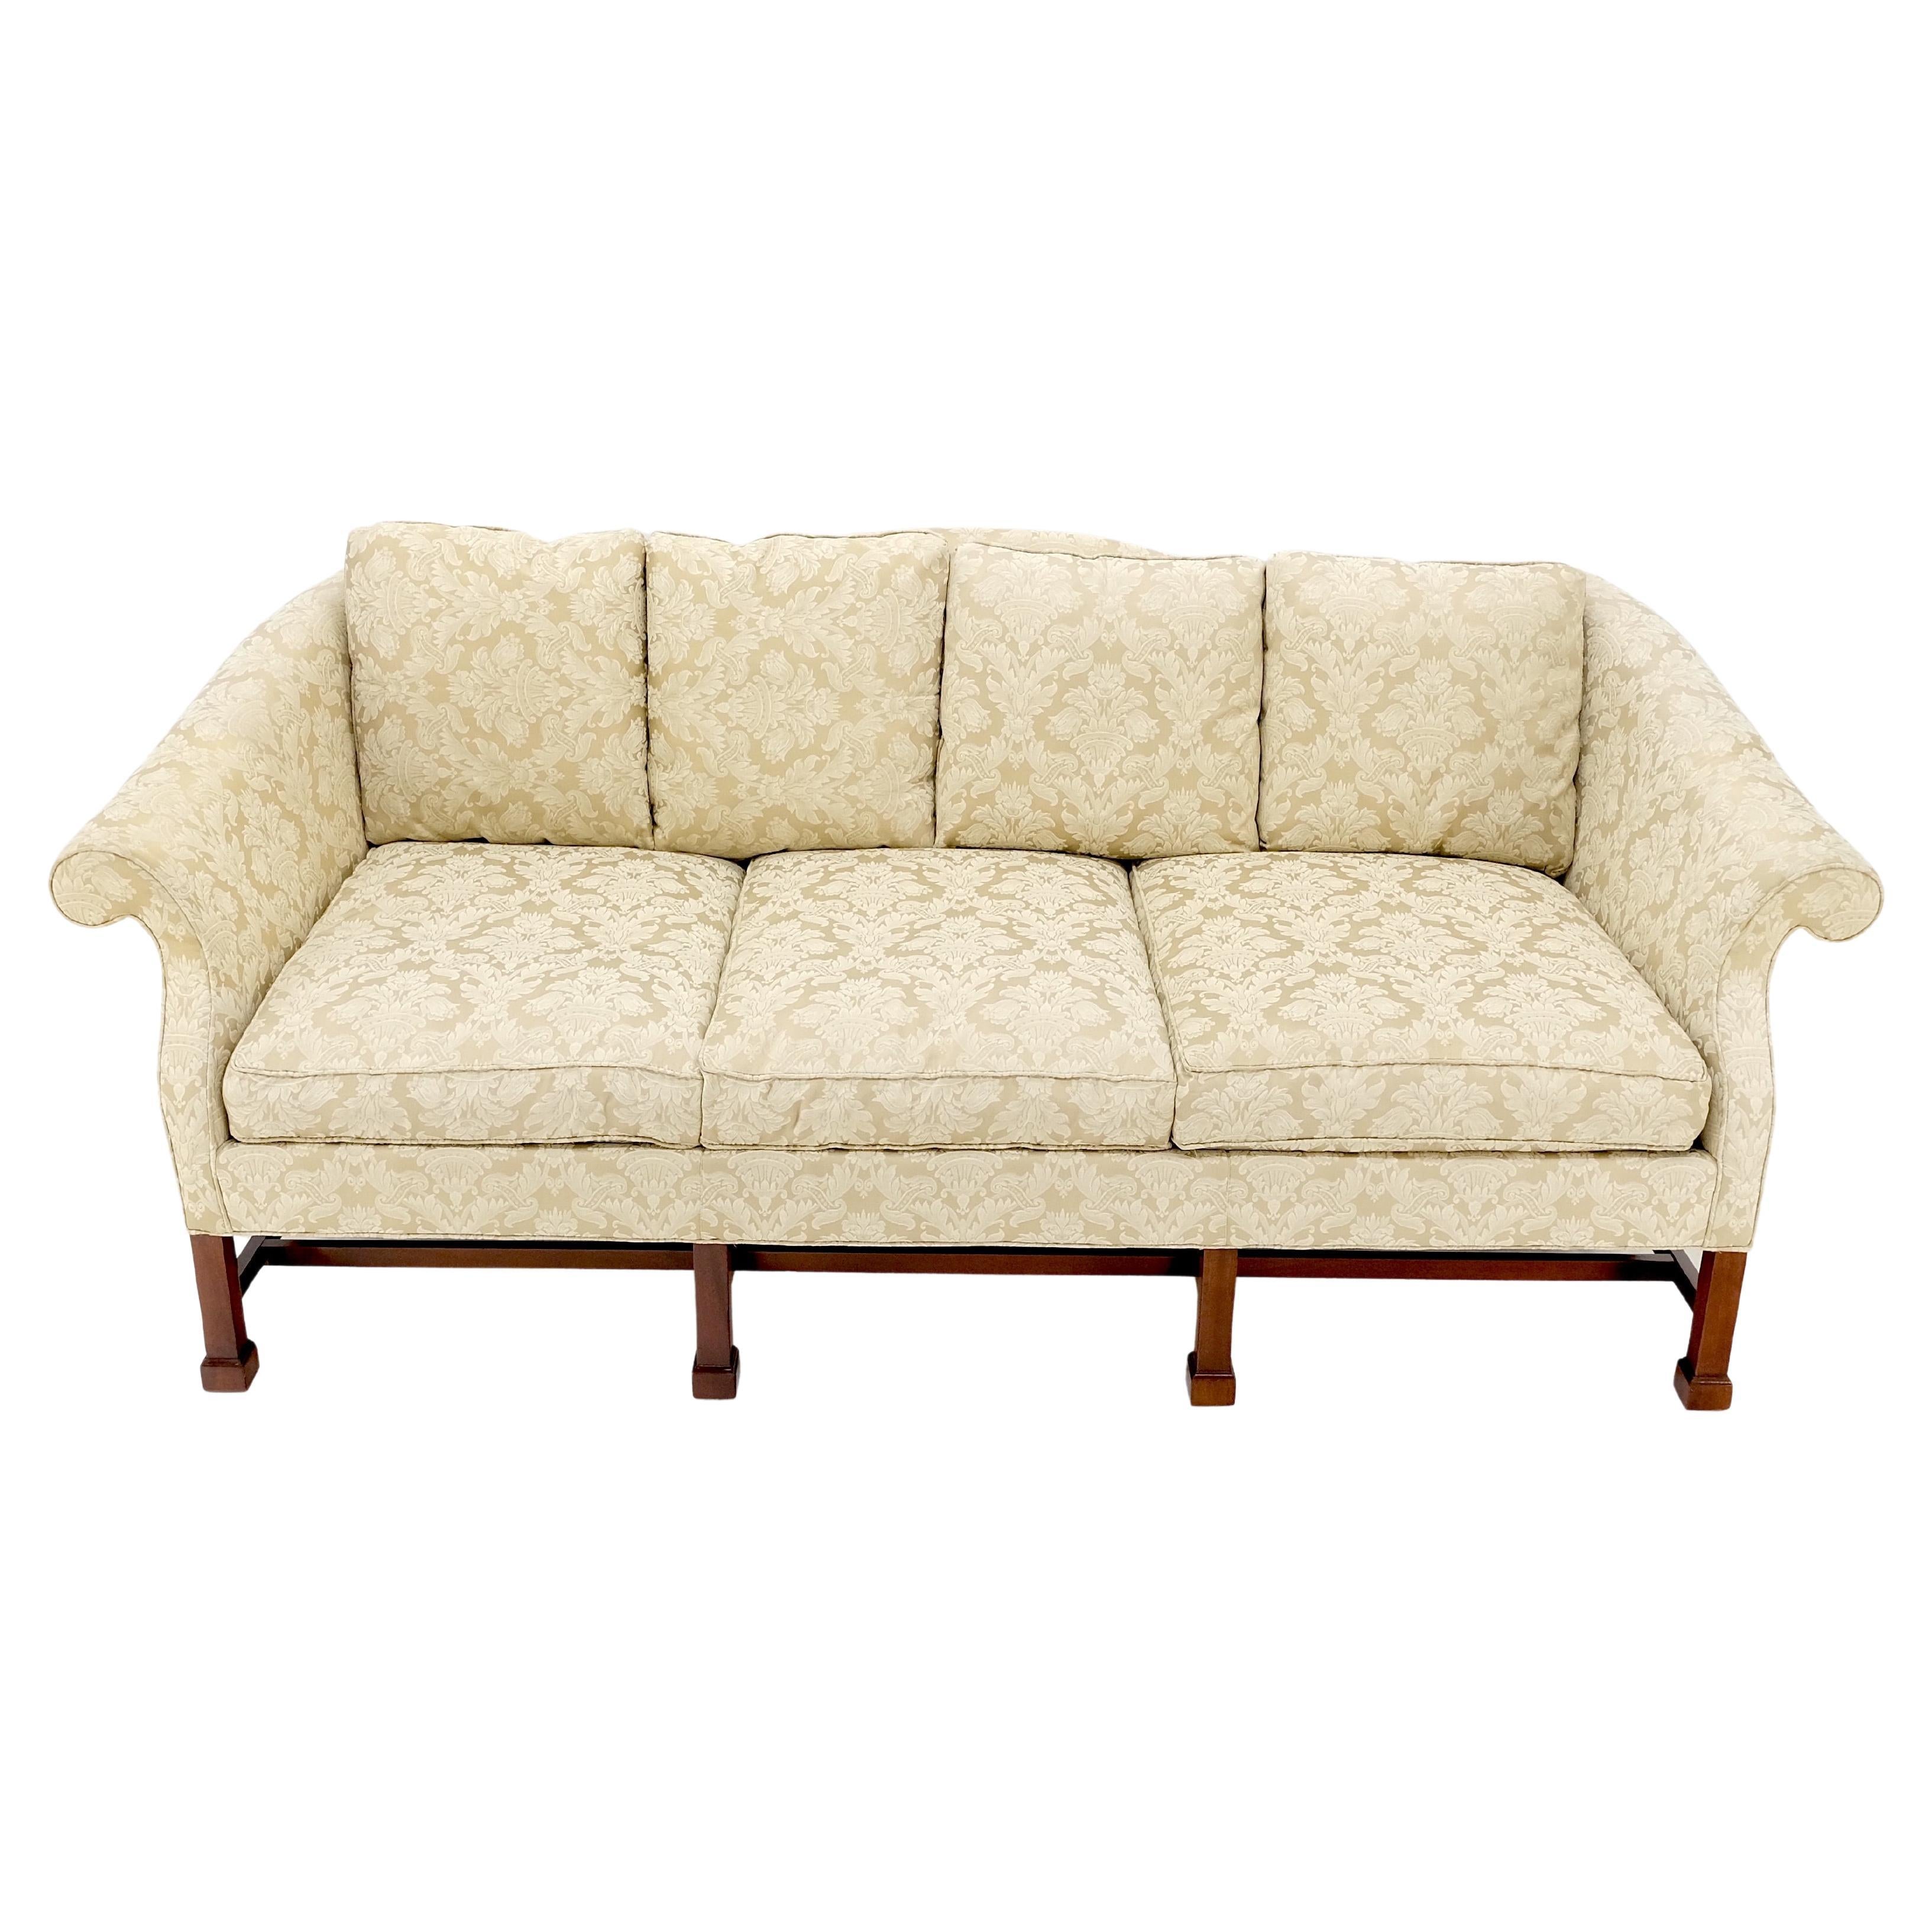 Camel Back Federal Style Mahogany Stretcher Base Beige Upholstery Sofa Mint! For Sale